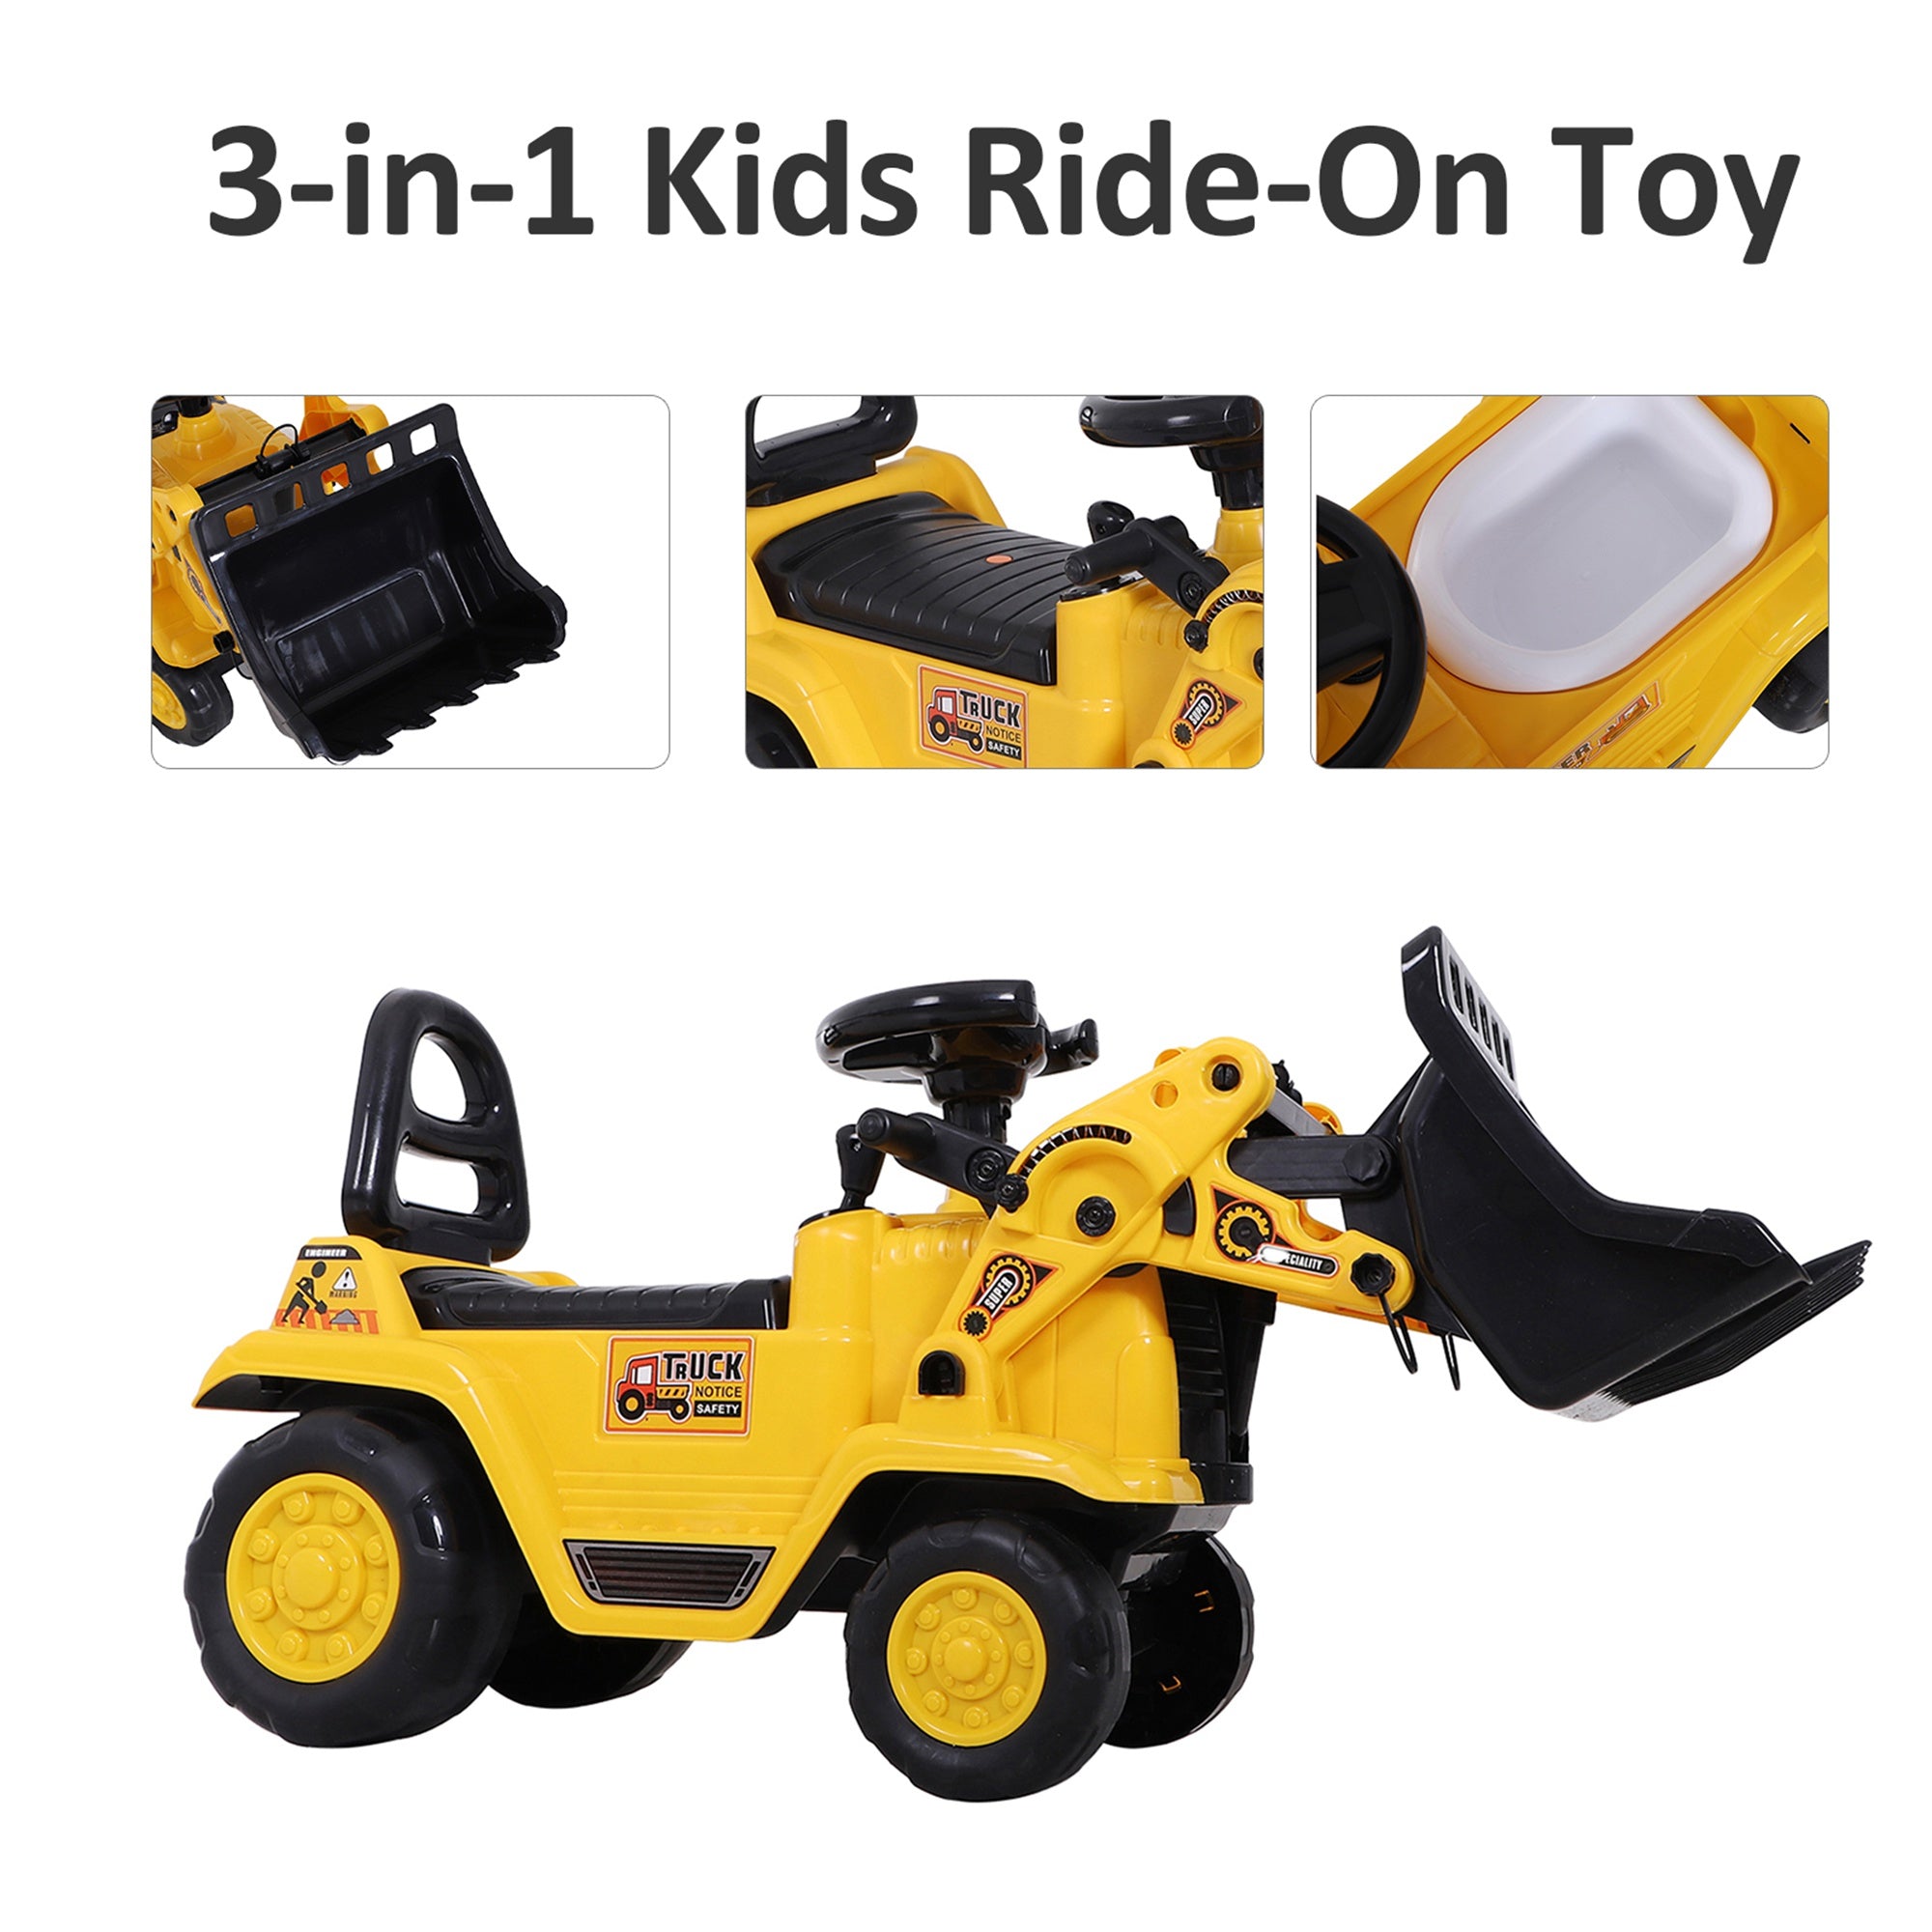 HOMCOM NO POWER 3 in 1 Ride On Toy Bulldozer Digger Tractor Pulling Cart Pretend Play Construction Truck - Inspirely